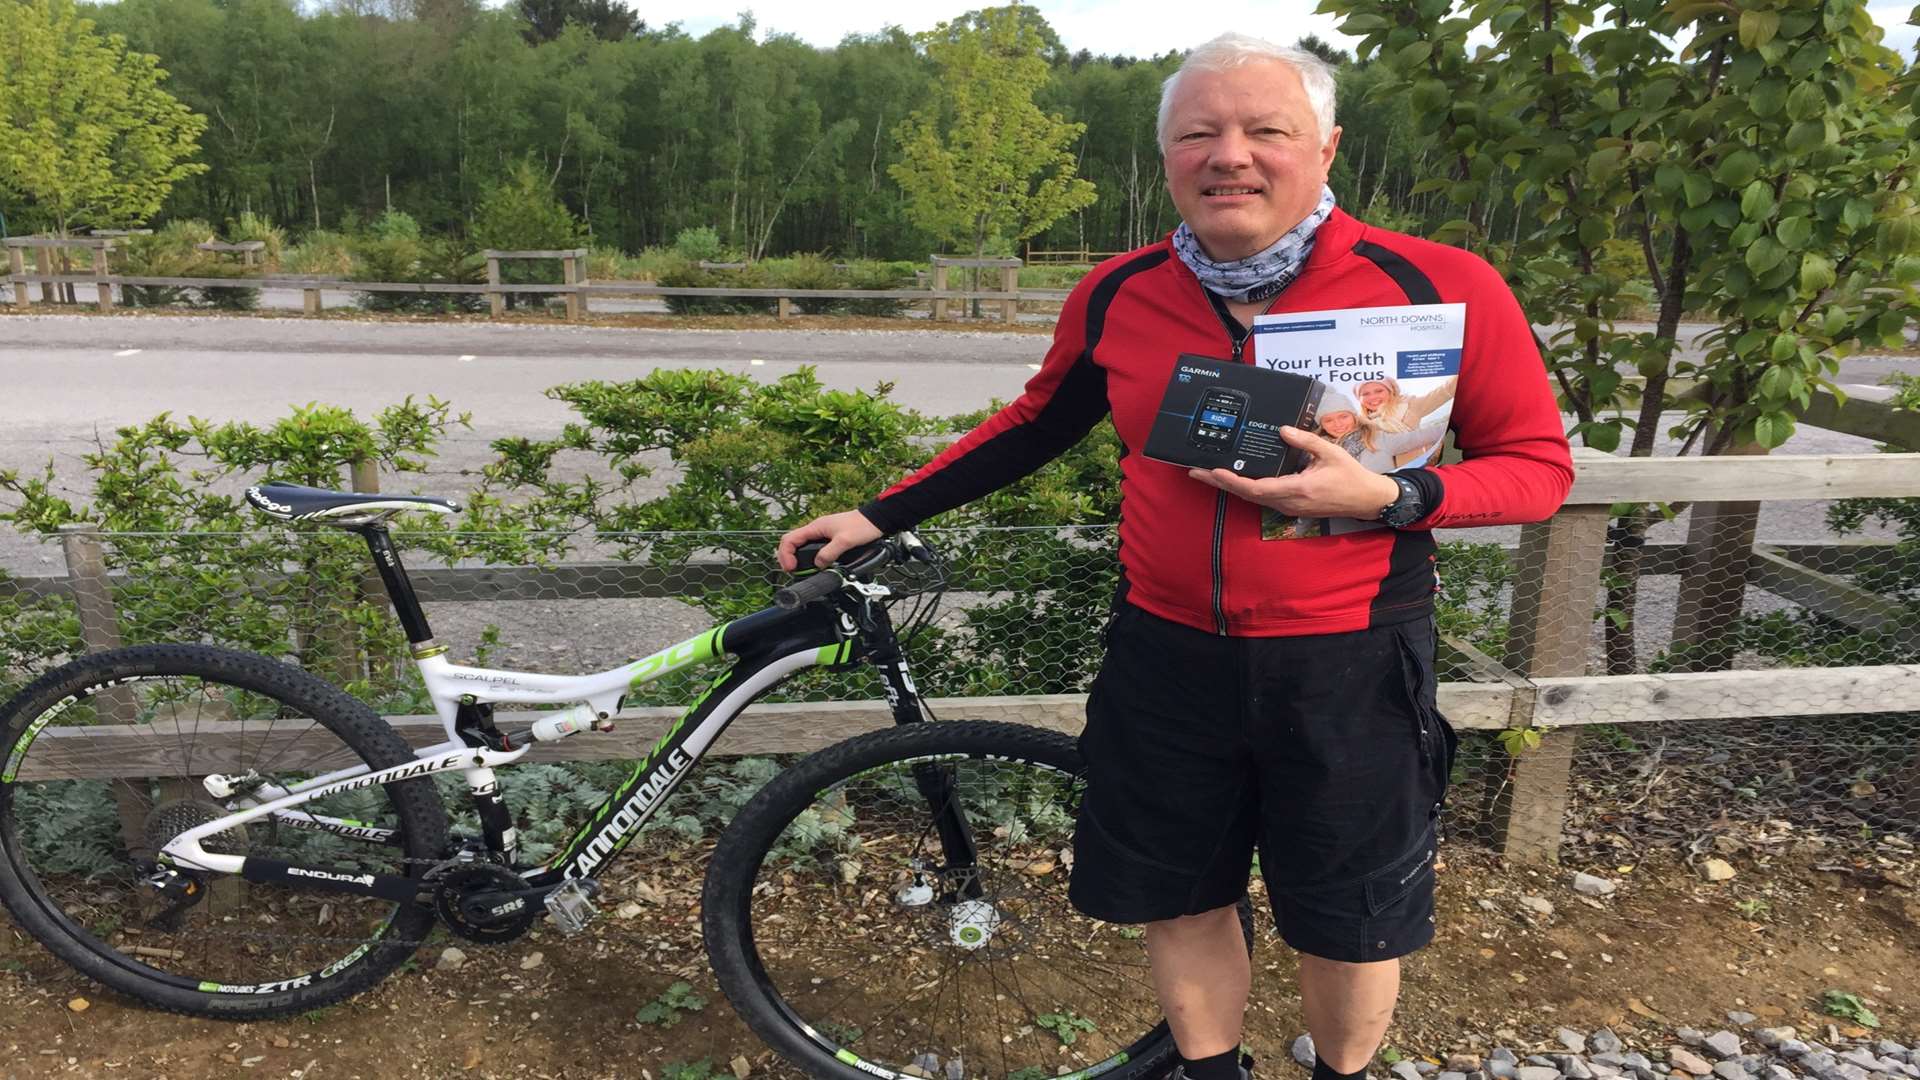 Paul Diamond will take part in the ride for British Heart Foundation